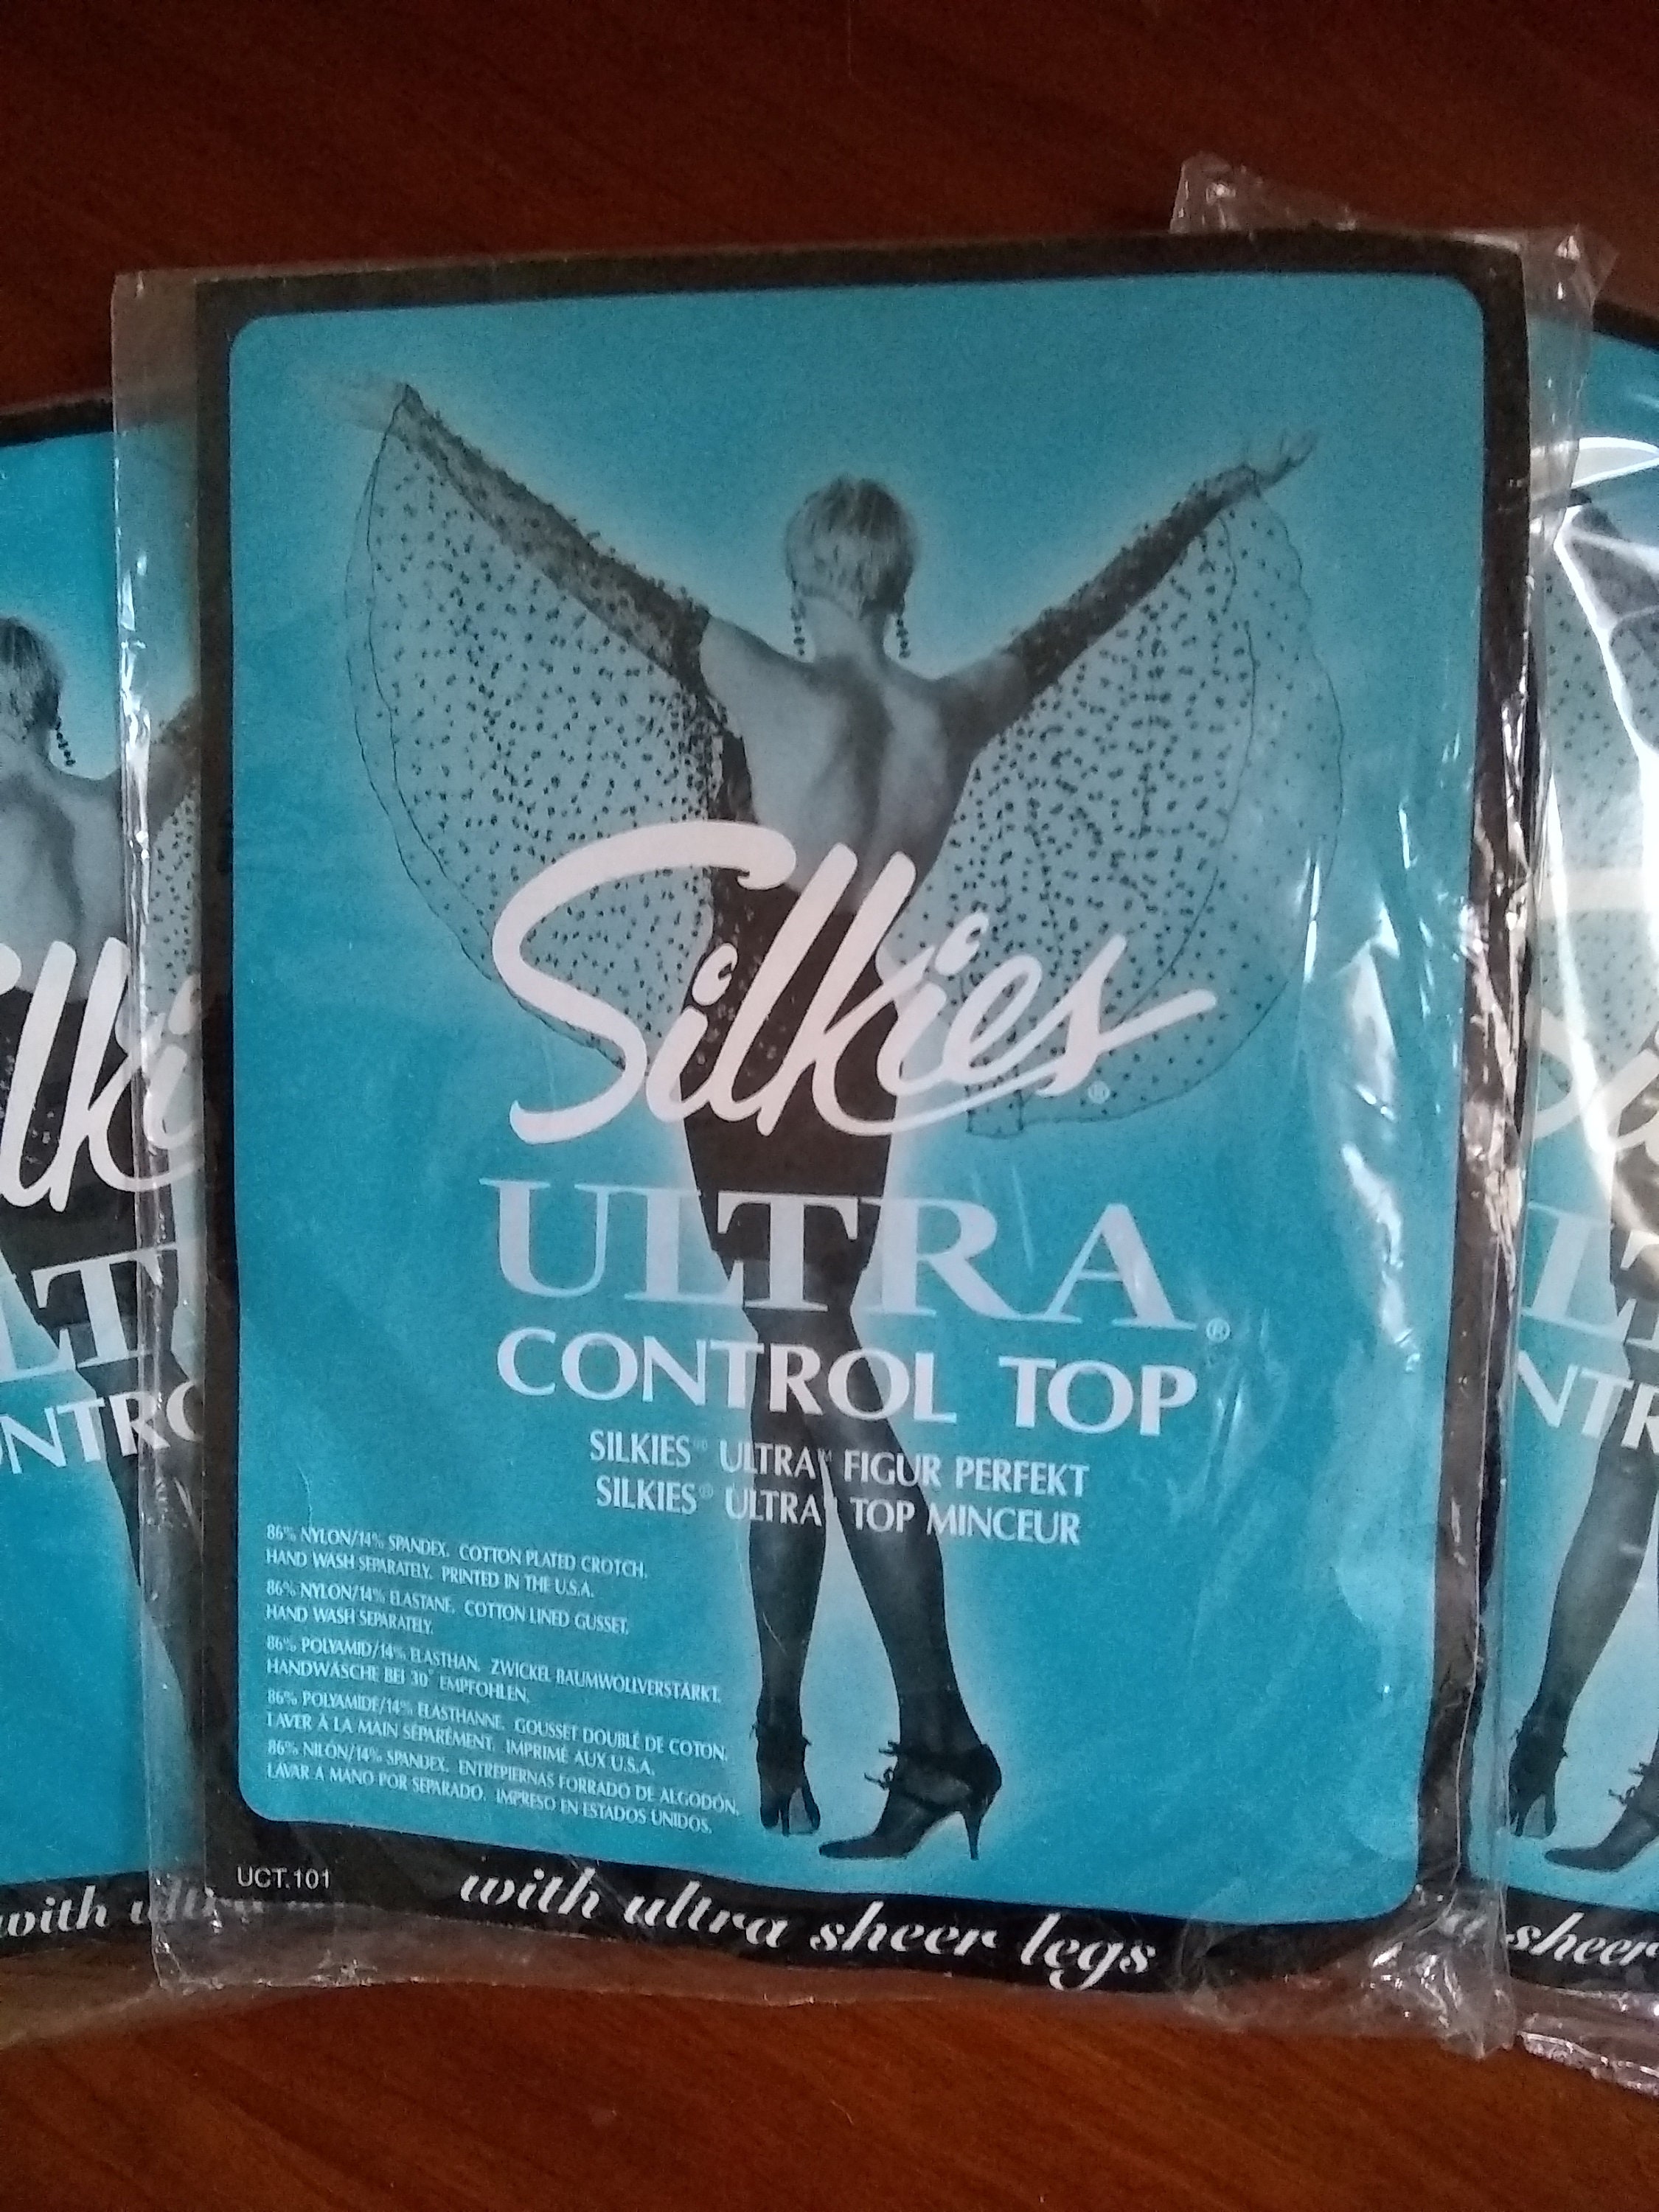 Vintage Silkies Ultra Control Top with Ultra Sheer Legs Pantyhose/Stockings  - 1 Unopened 70s Package, Size - Large, Color - Navy Blue, Nice!